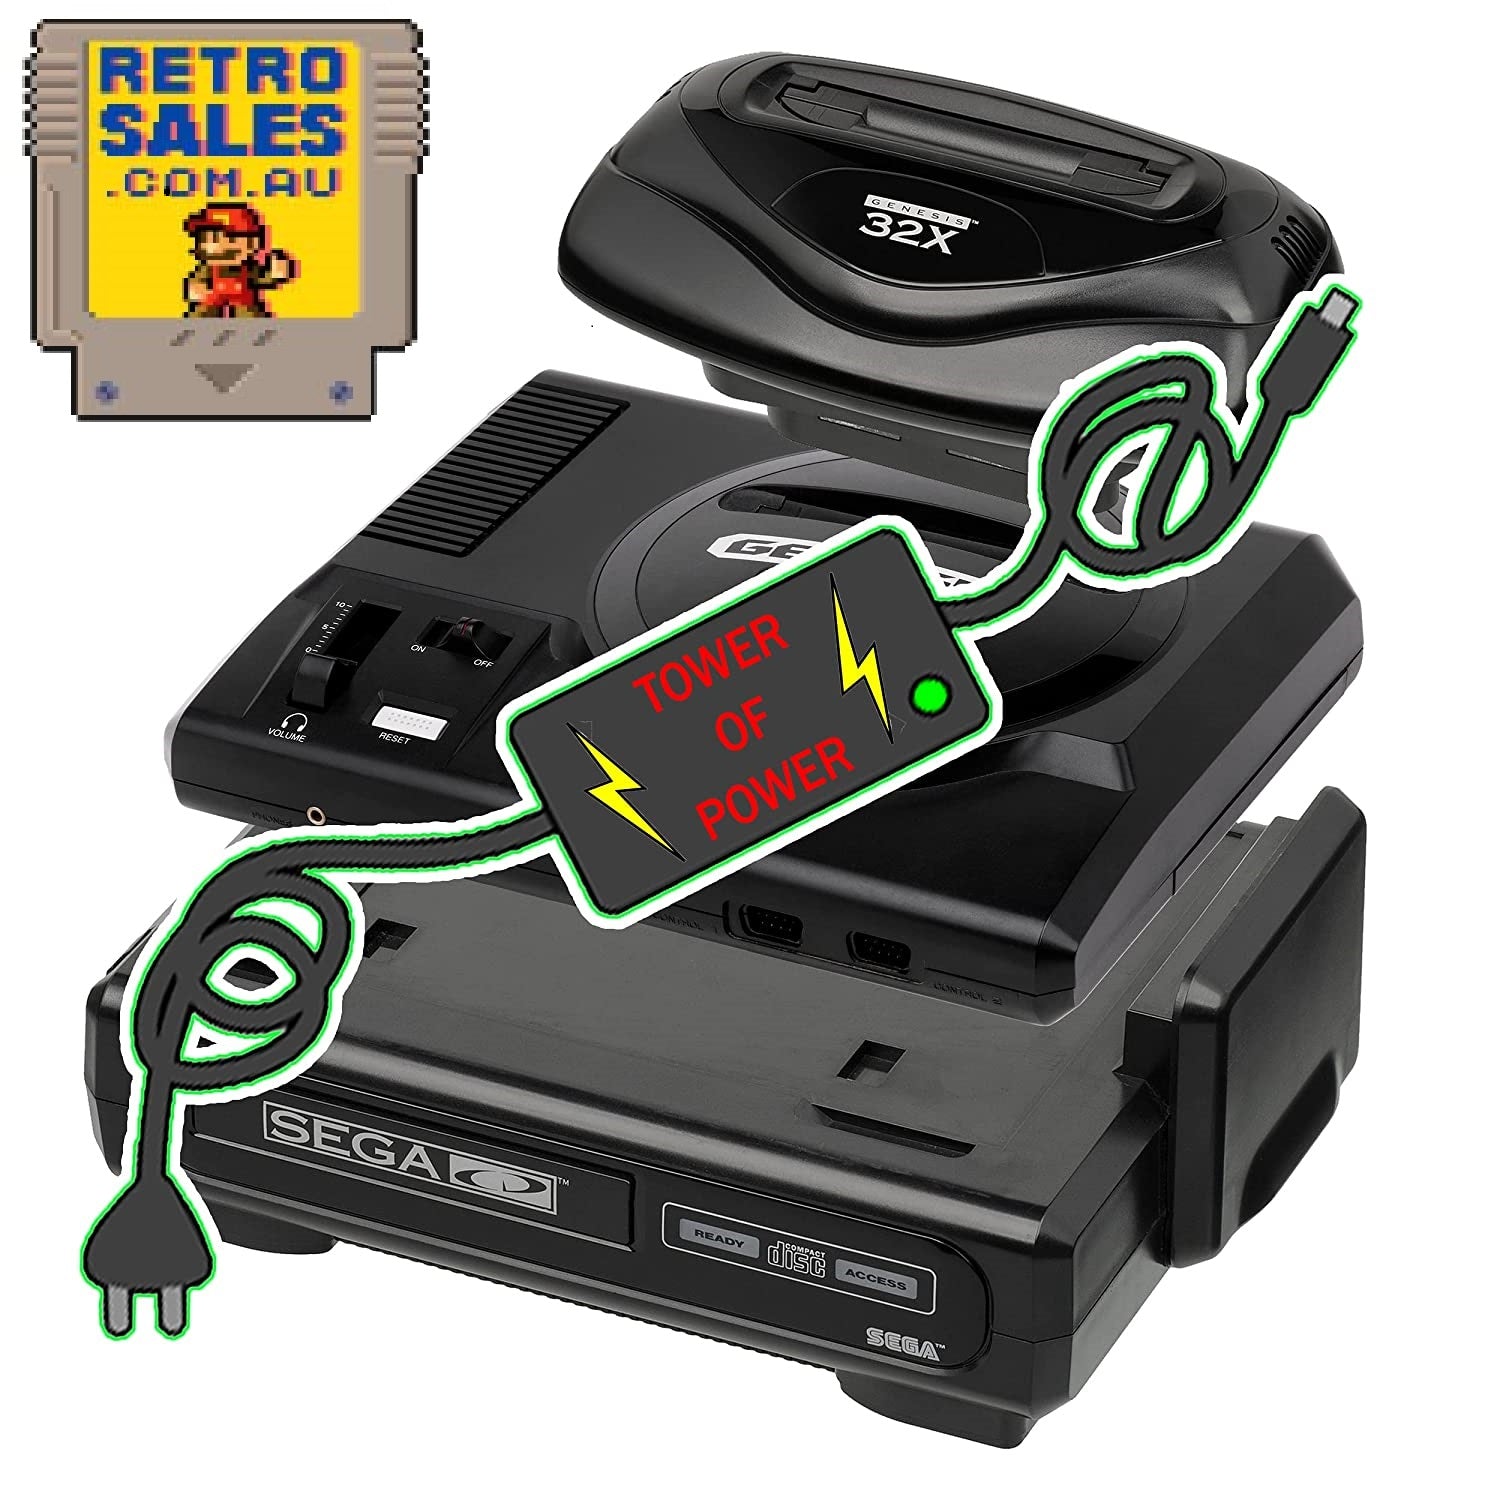 Accessory | Power Supply | SEGA Mega Drive CD 32X | Tower Of Power 5 in 1 Adapter